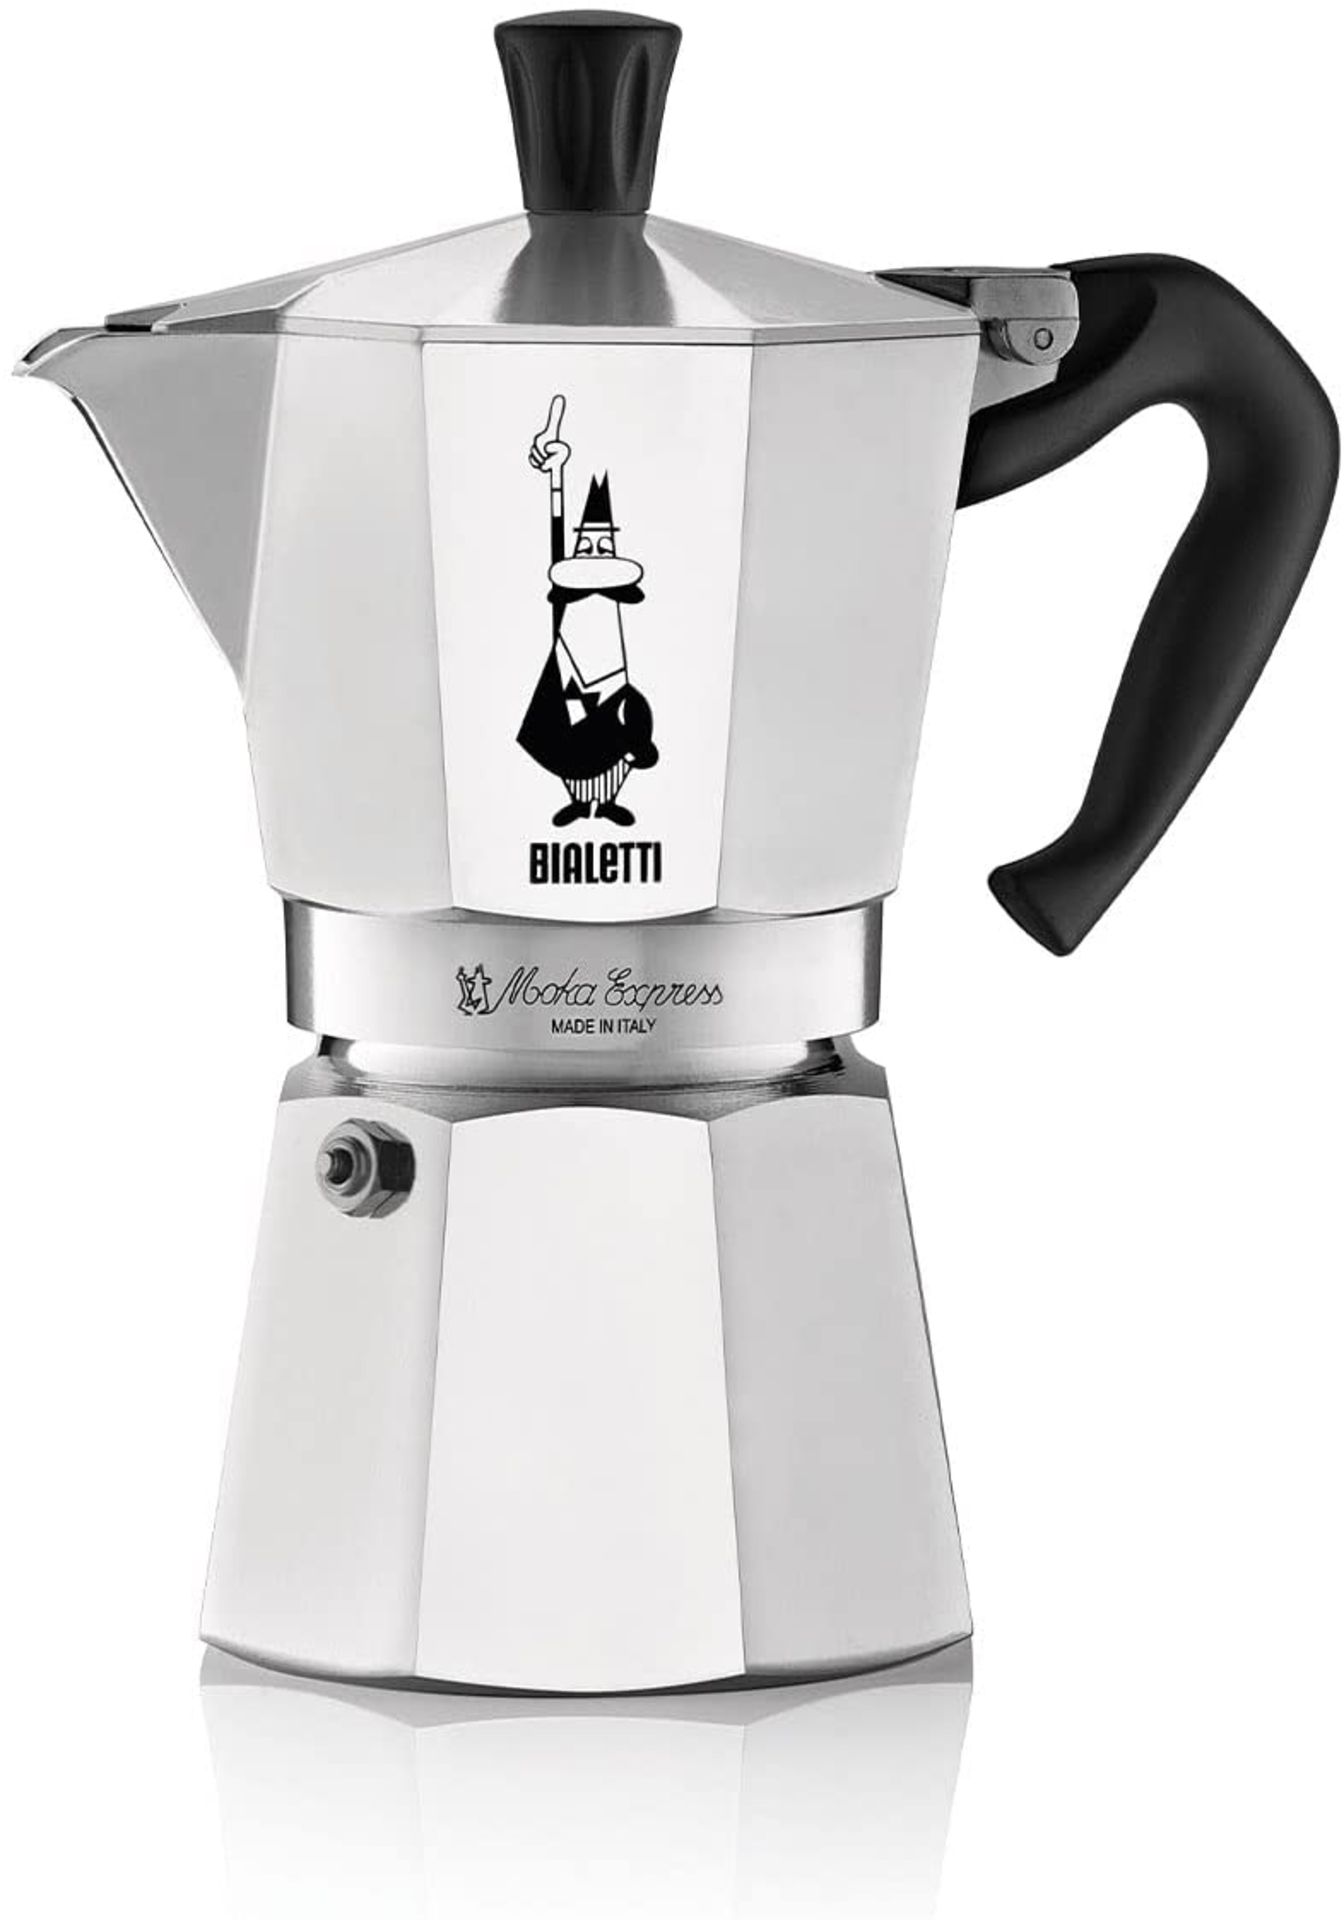 BIALETTI MOKA EXPRESS 6CUP RRP £27Condition ReportAppraisal Available on Request - All Items are